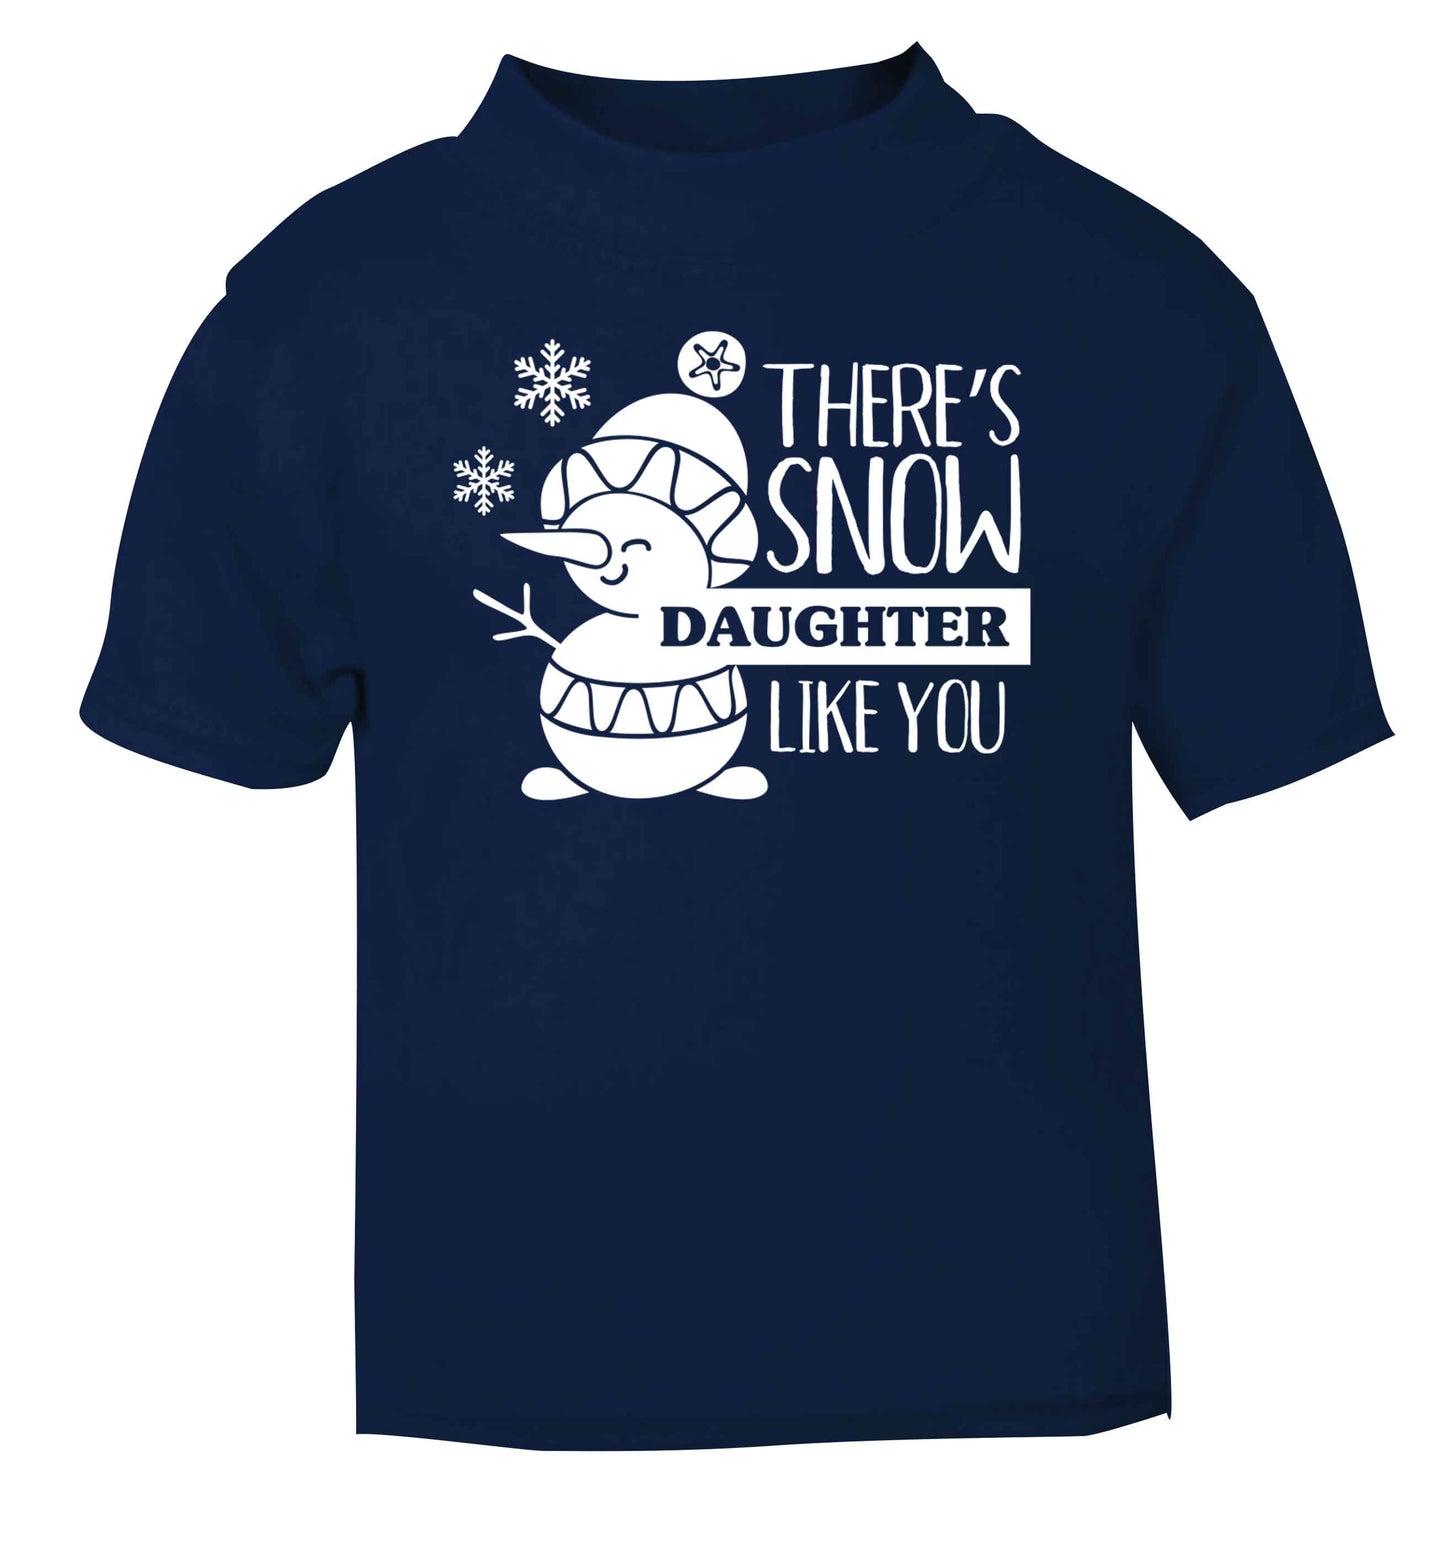 There's snow daughter like you navy baby toddler Tshirt 2 Years